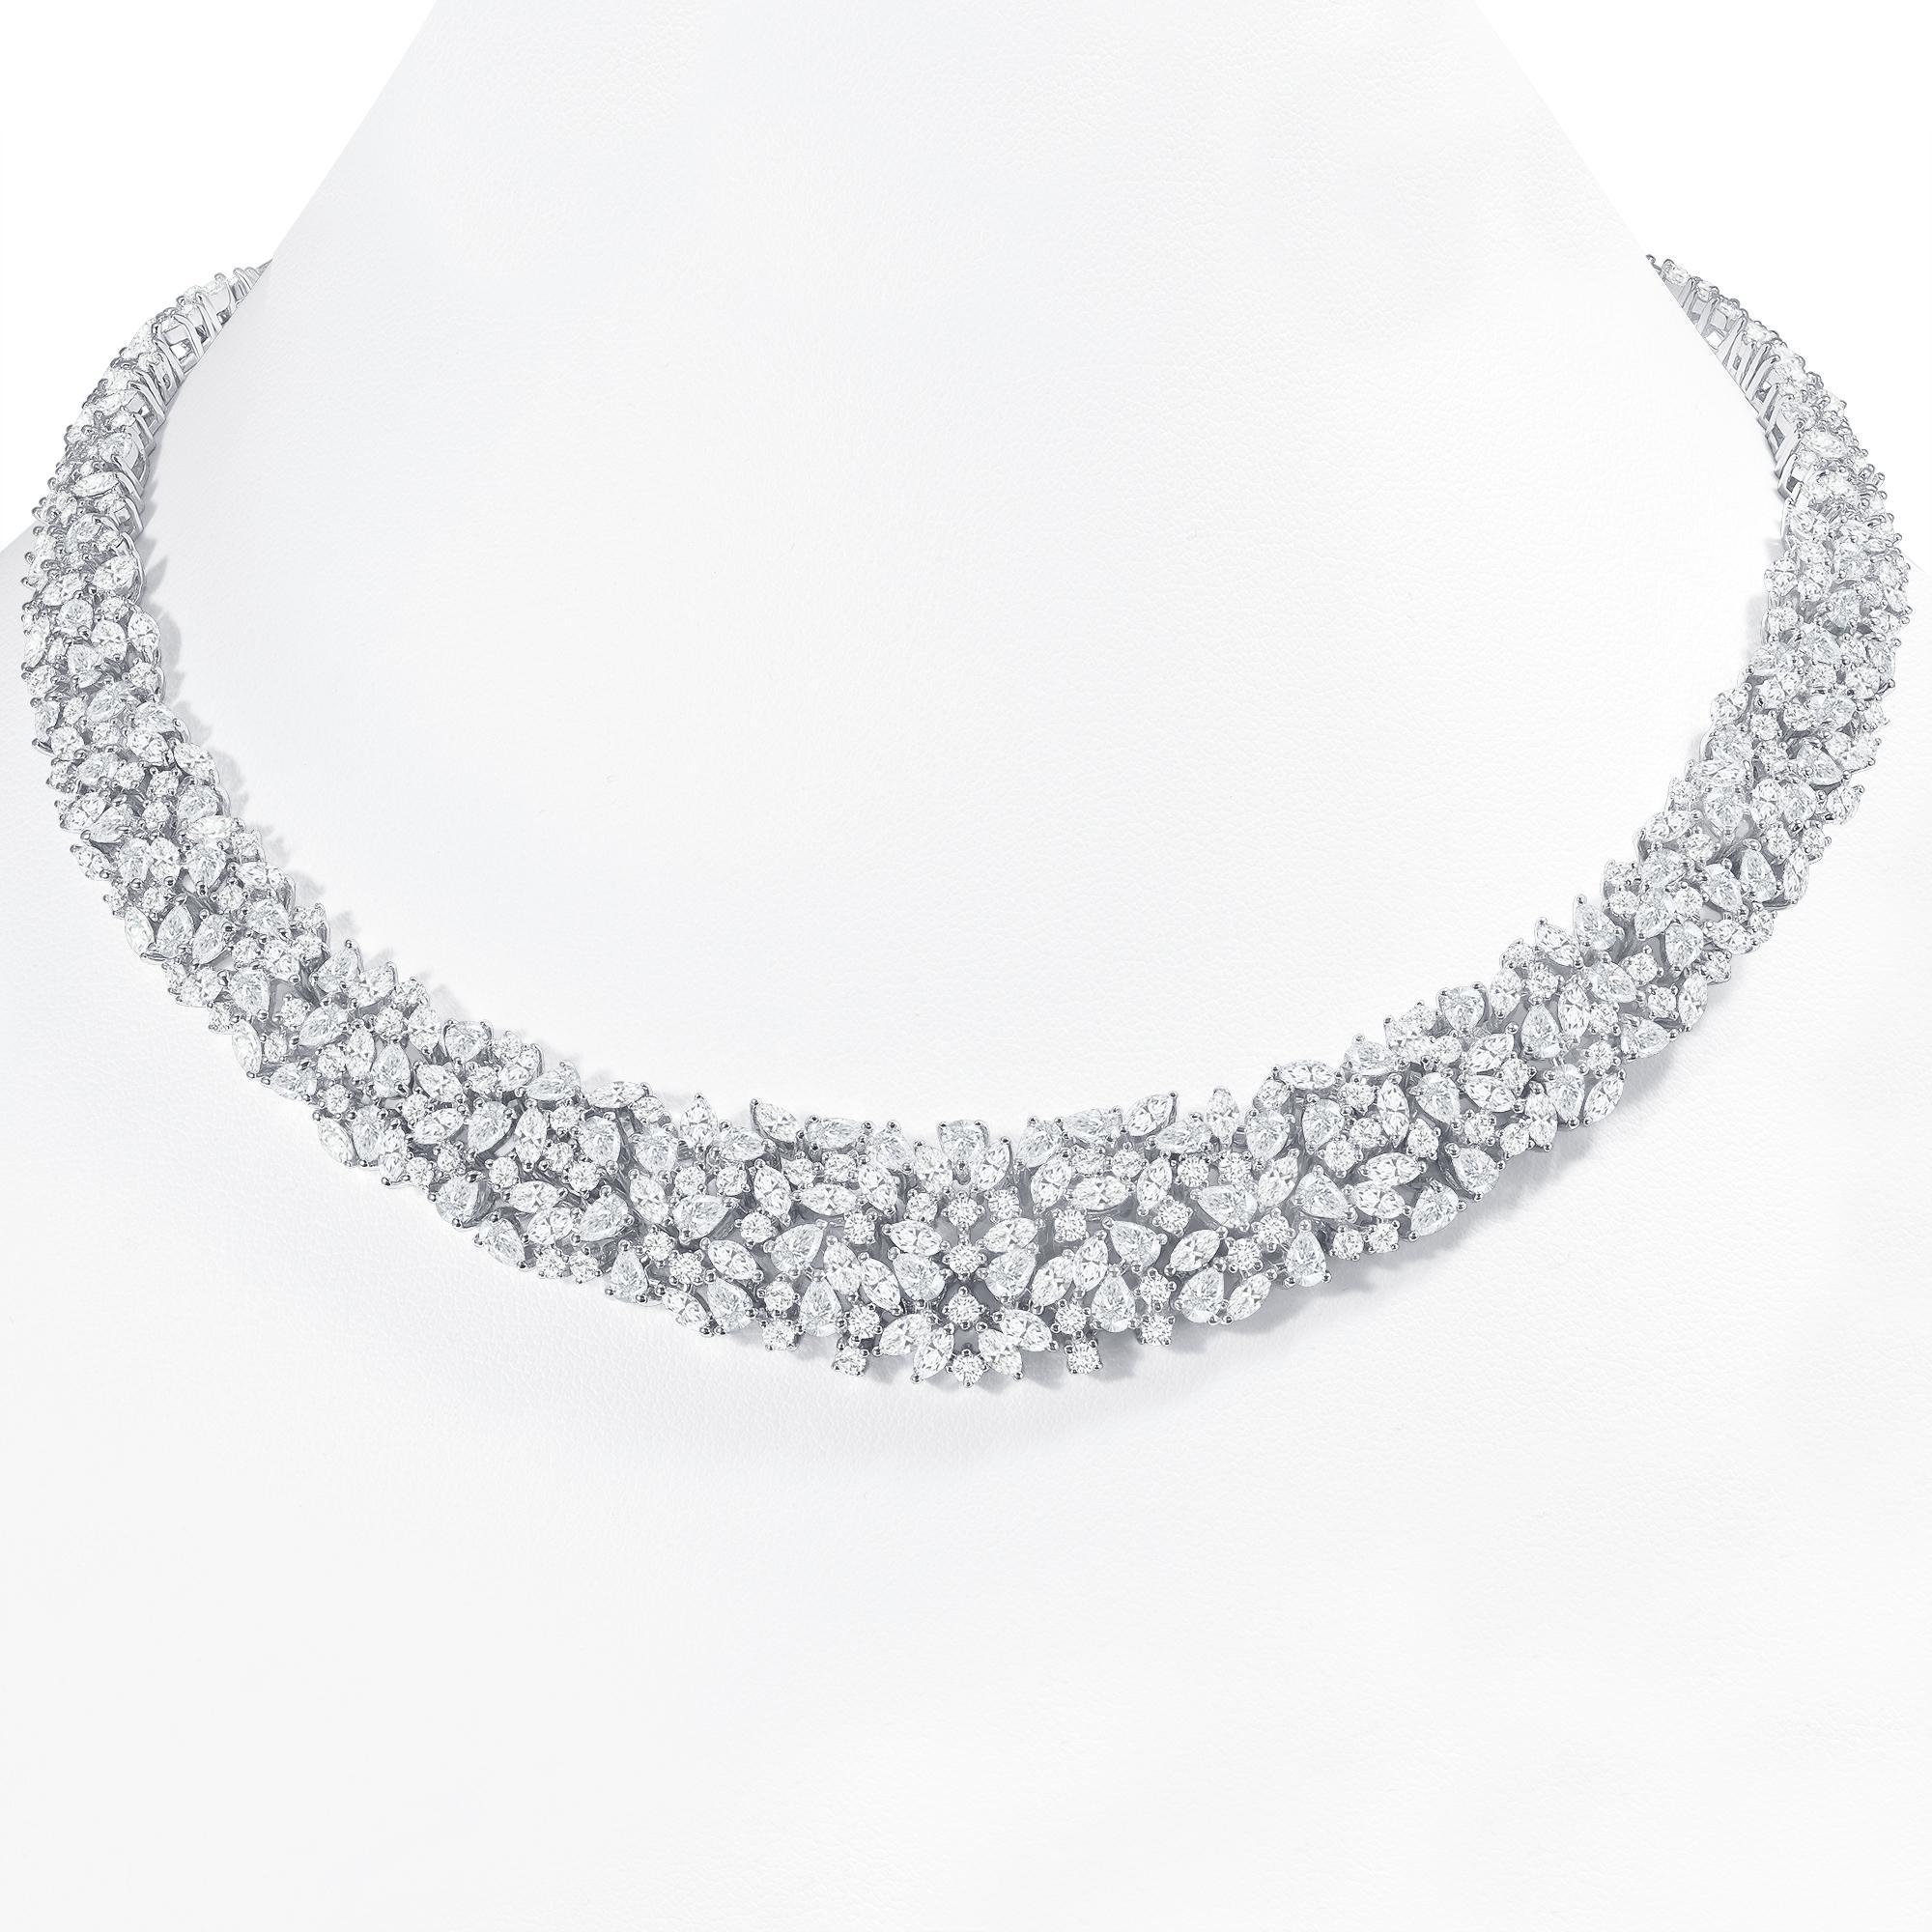 Round Cut 30 Carat Diamond Cluster Necklace, 18K White Gold For Sale